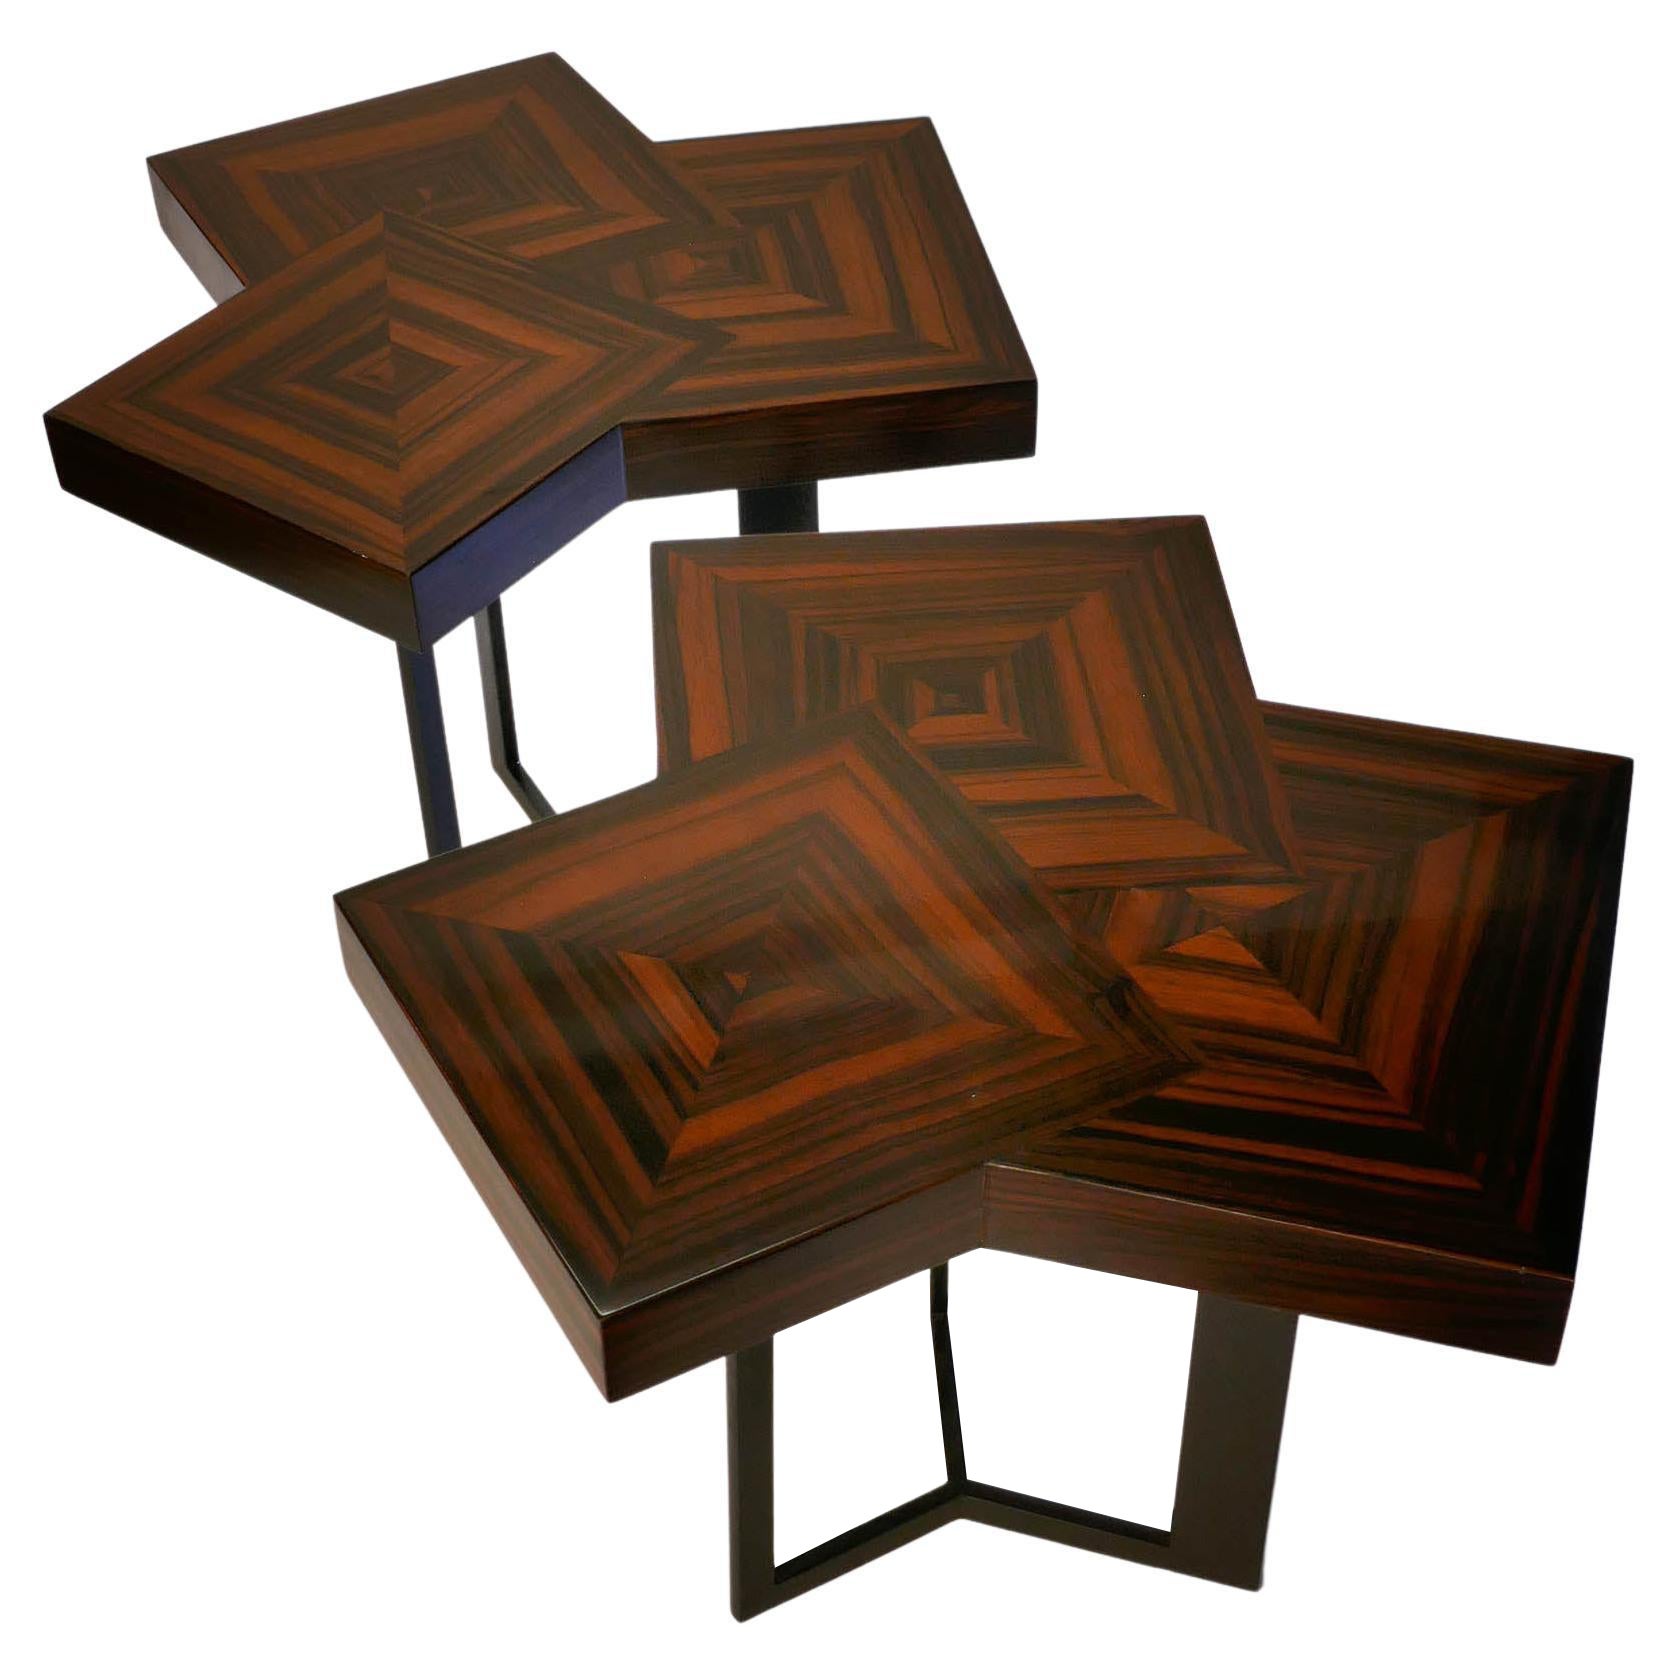 Pair of Coffee or End Table "Cubes" in Macassar Ebony Marquetery by A. Lefort For Sale